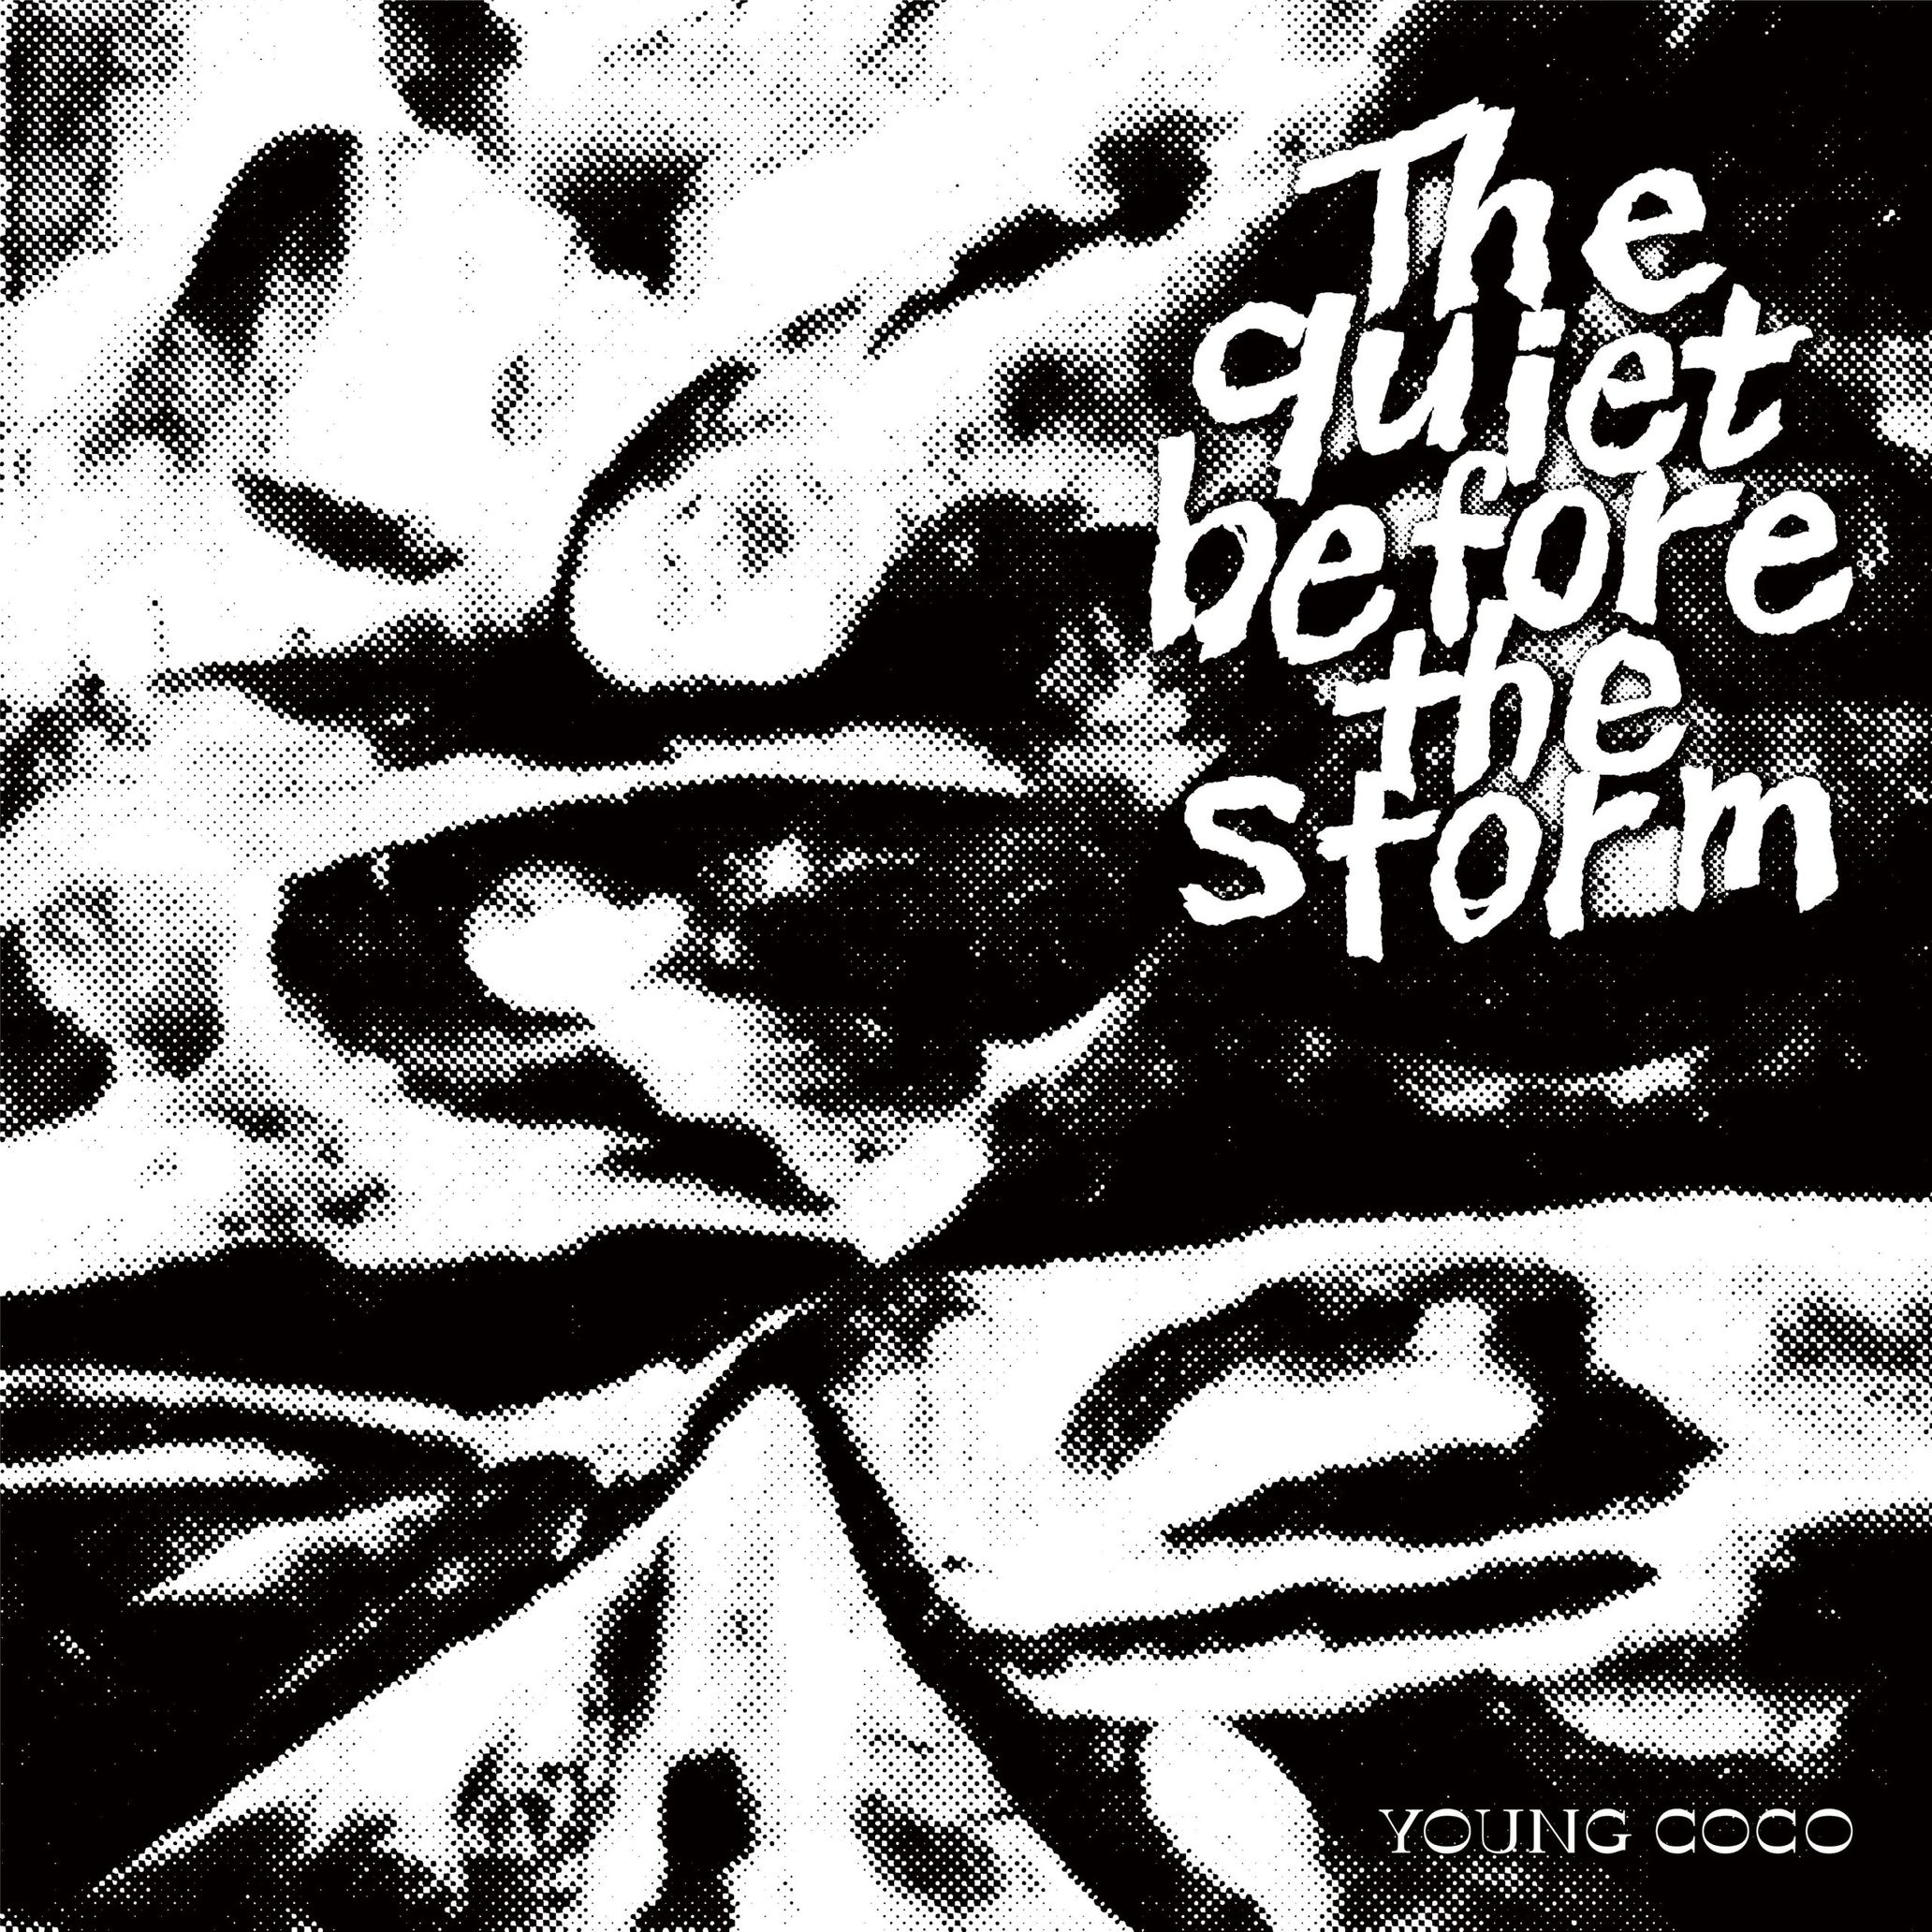 The Young Coco album, The quiet before the storm, designed by VERDY